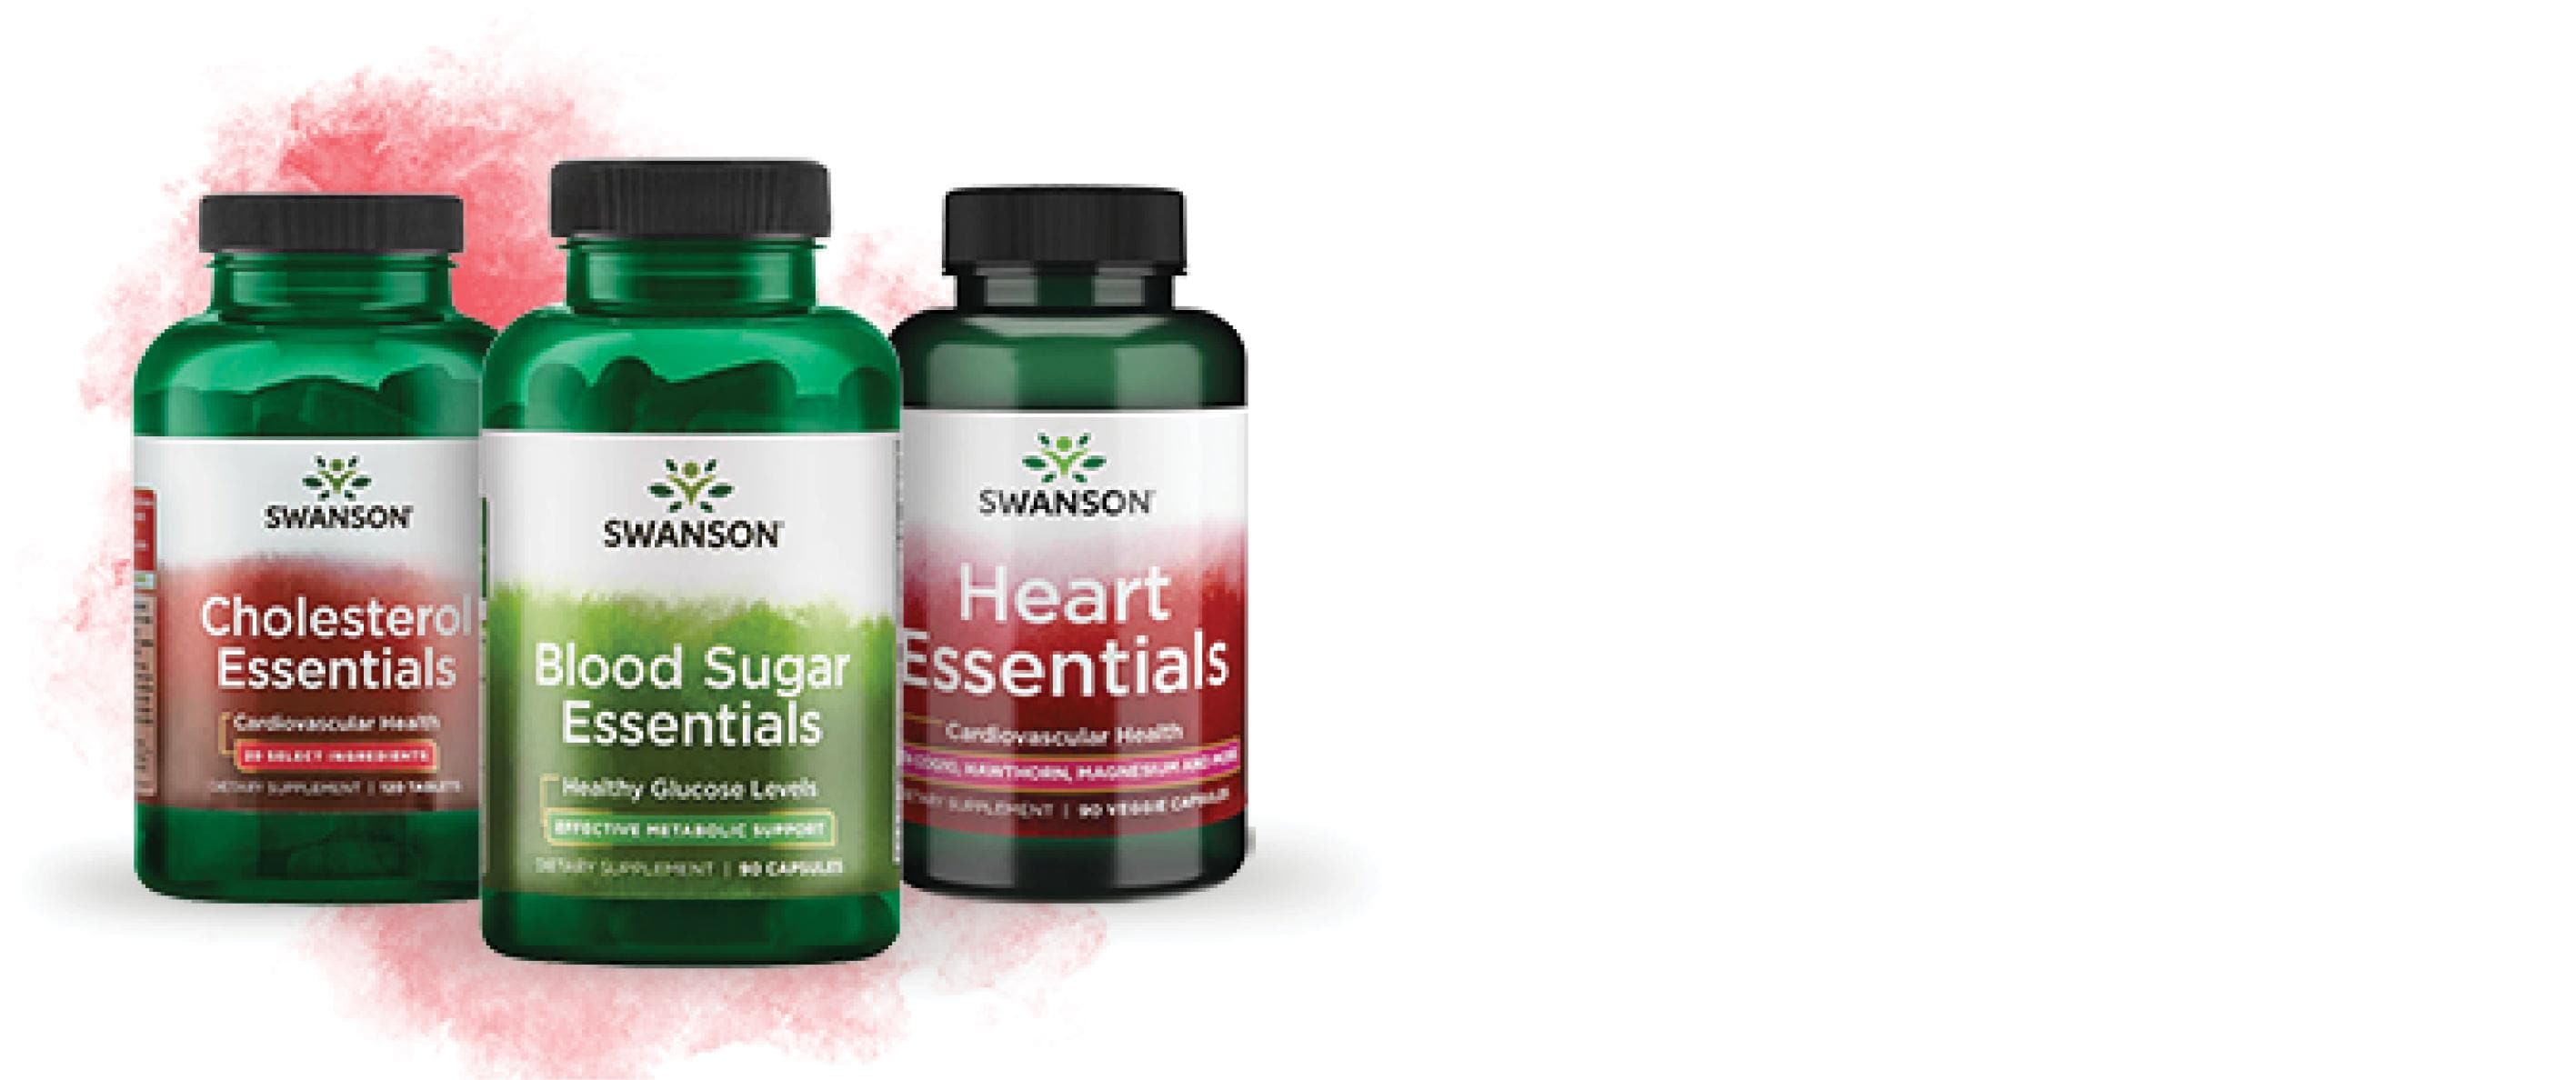 Find Fundamental Nutrients to Keep Your Heart Happy. All-encompassing heart support